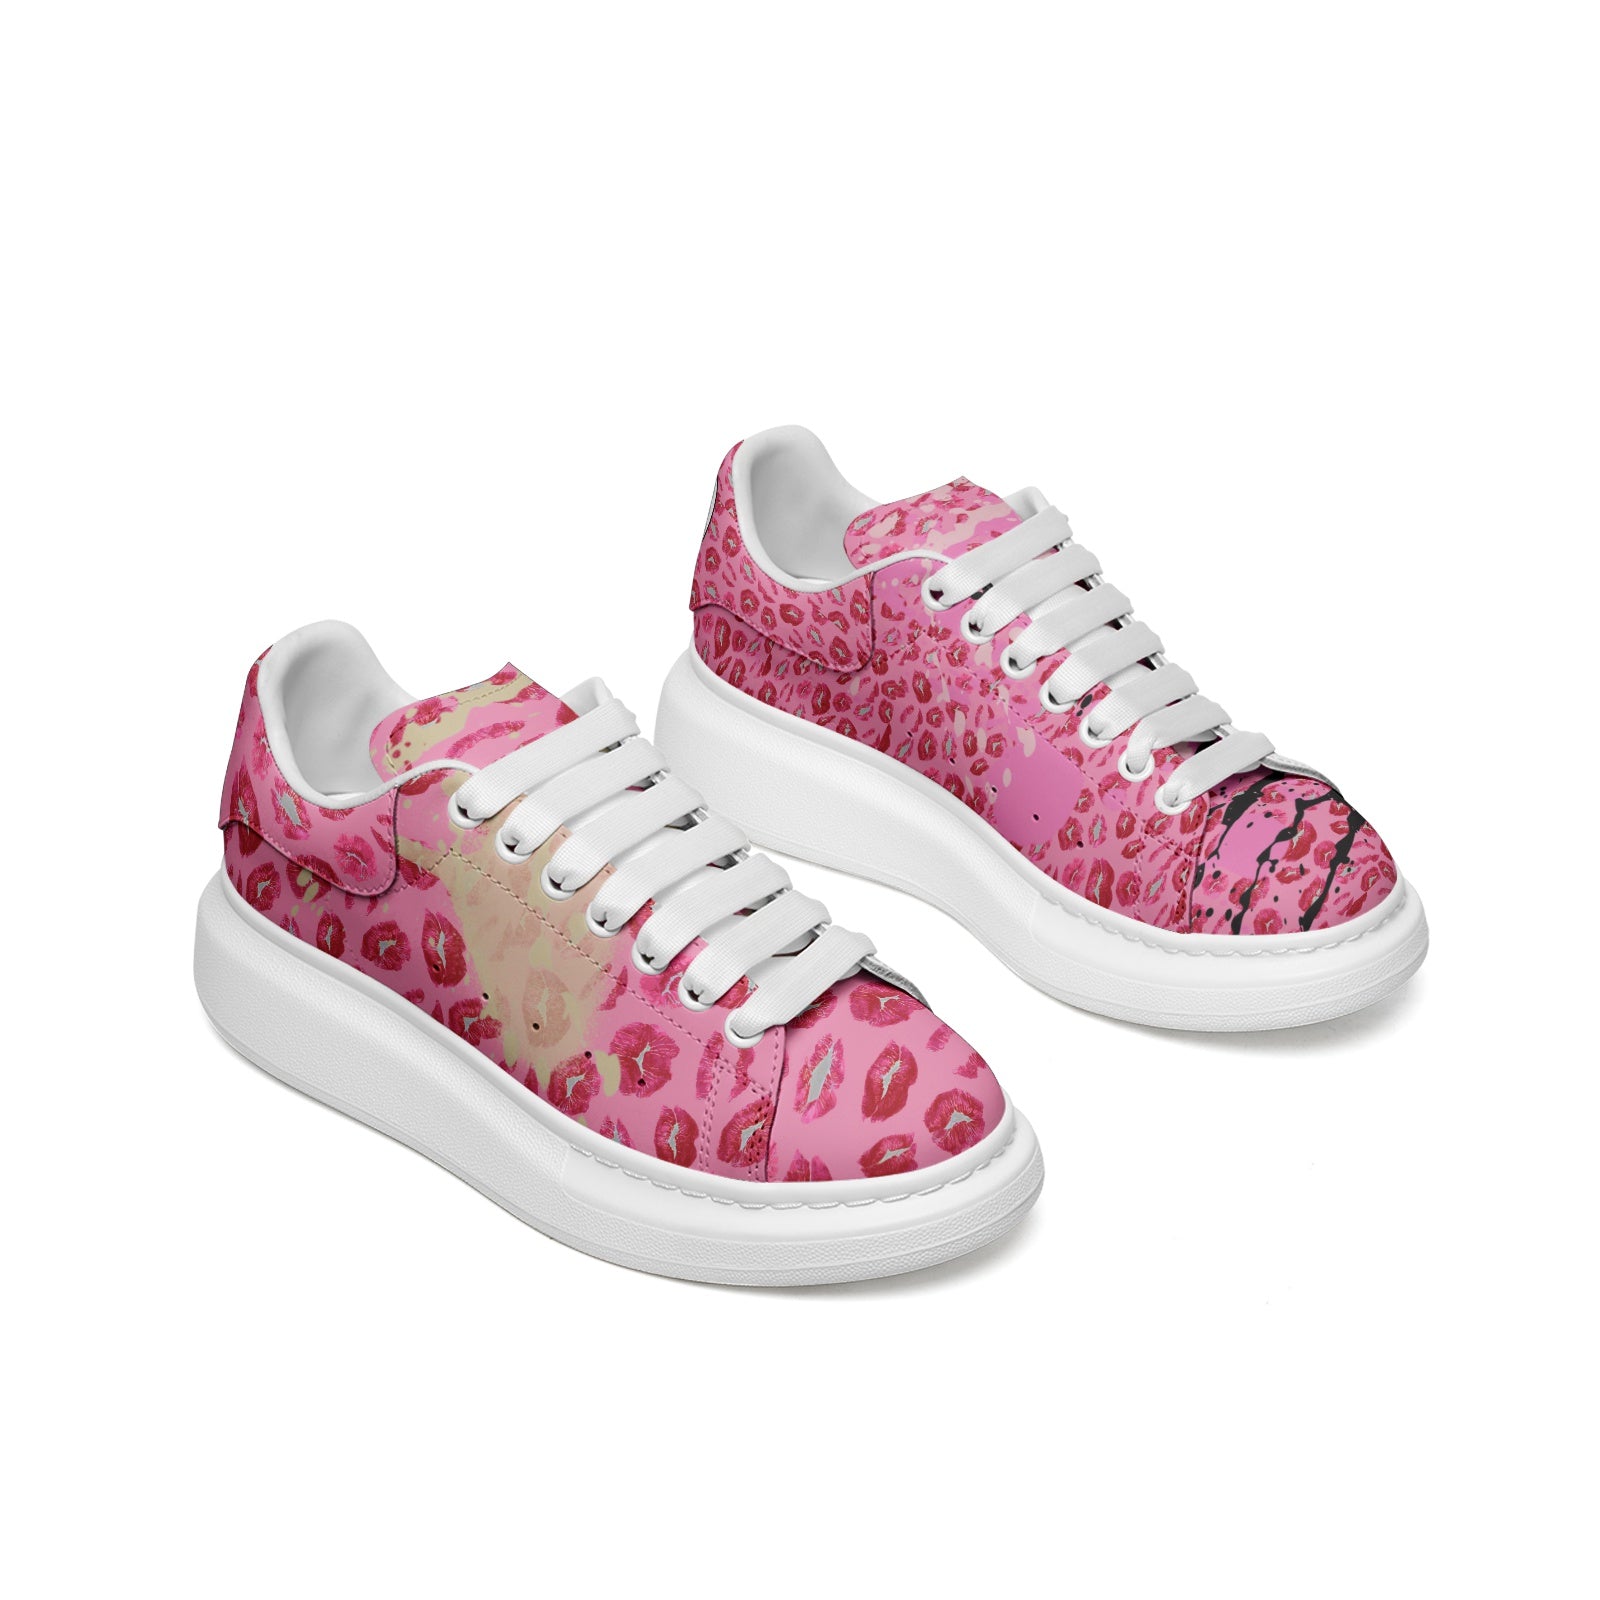 Unisex Non Slip Lace Up Leather Sneakers Printy6